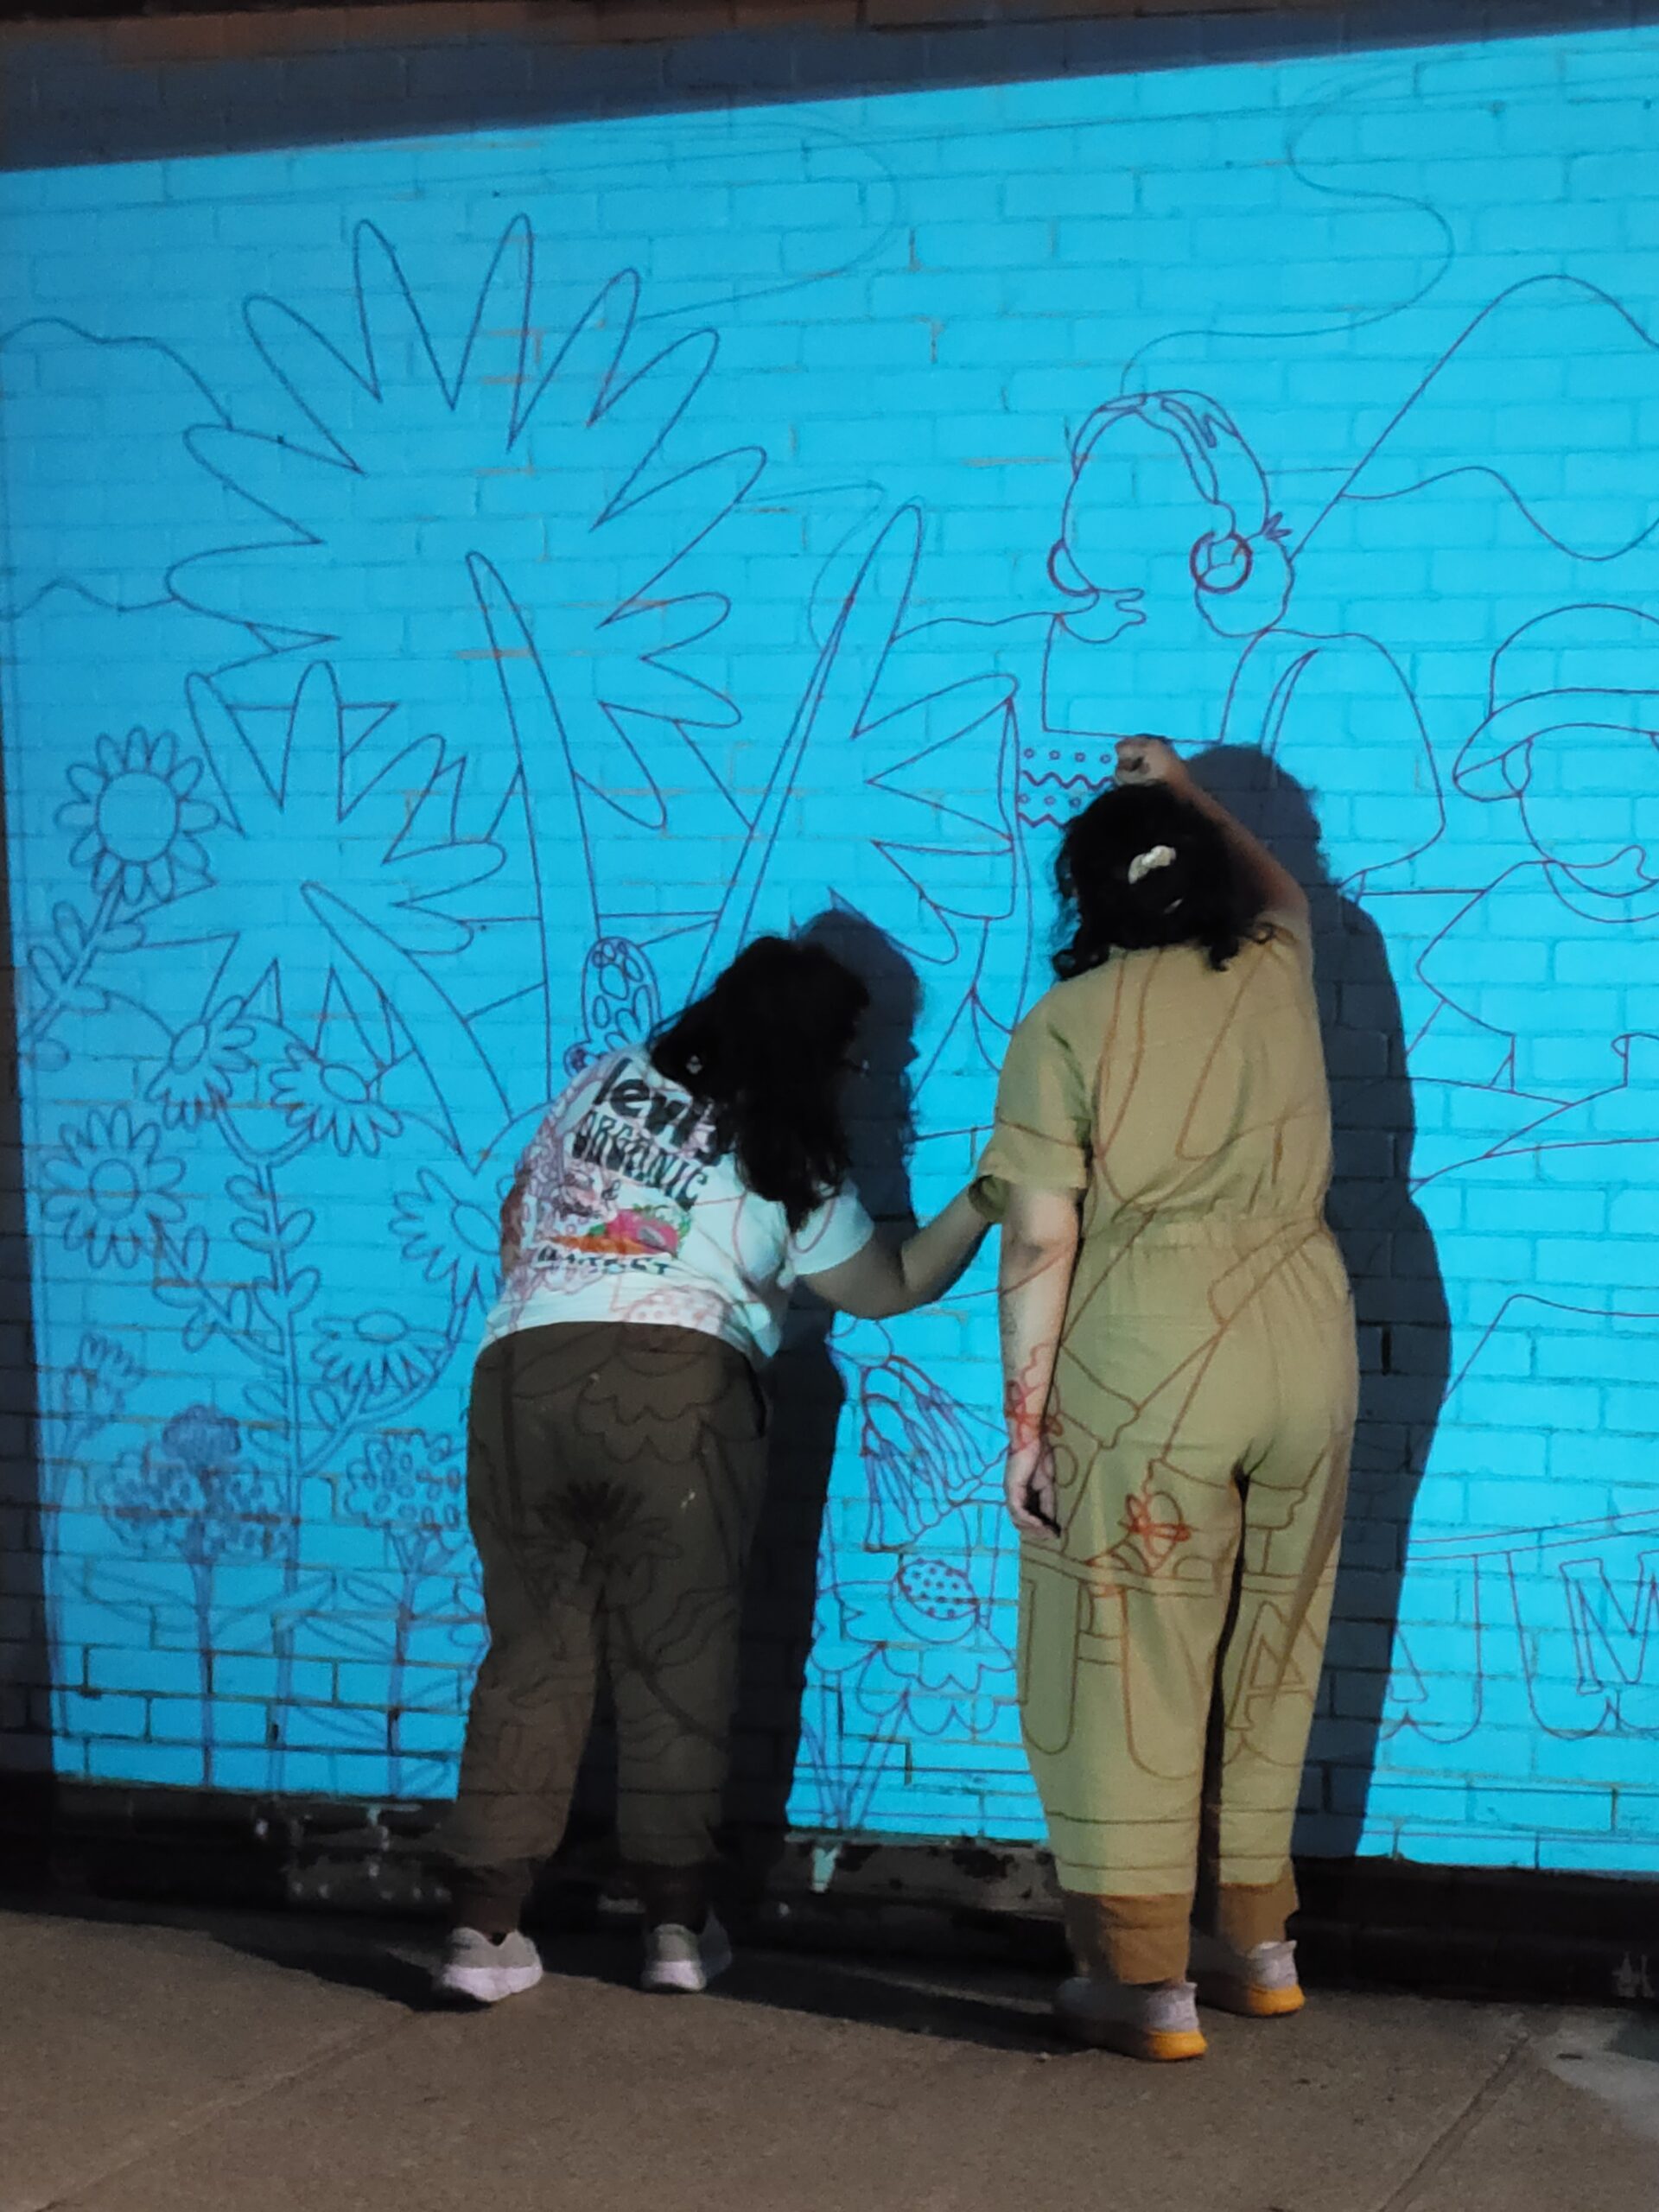 Two people sketching outlines of flowers and people on a blue wall.